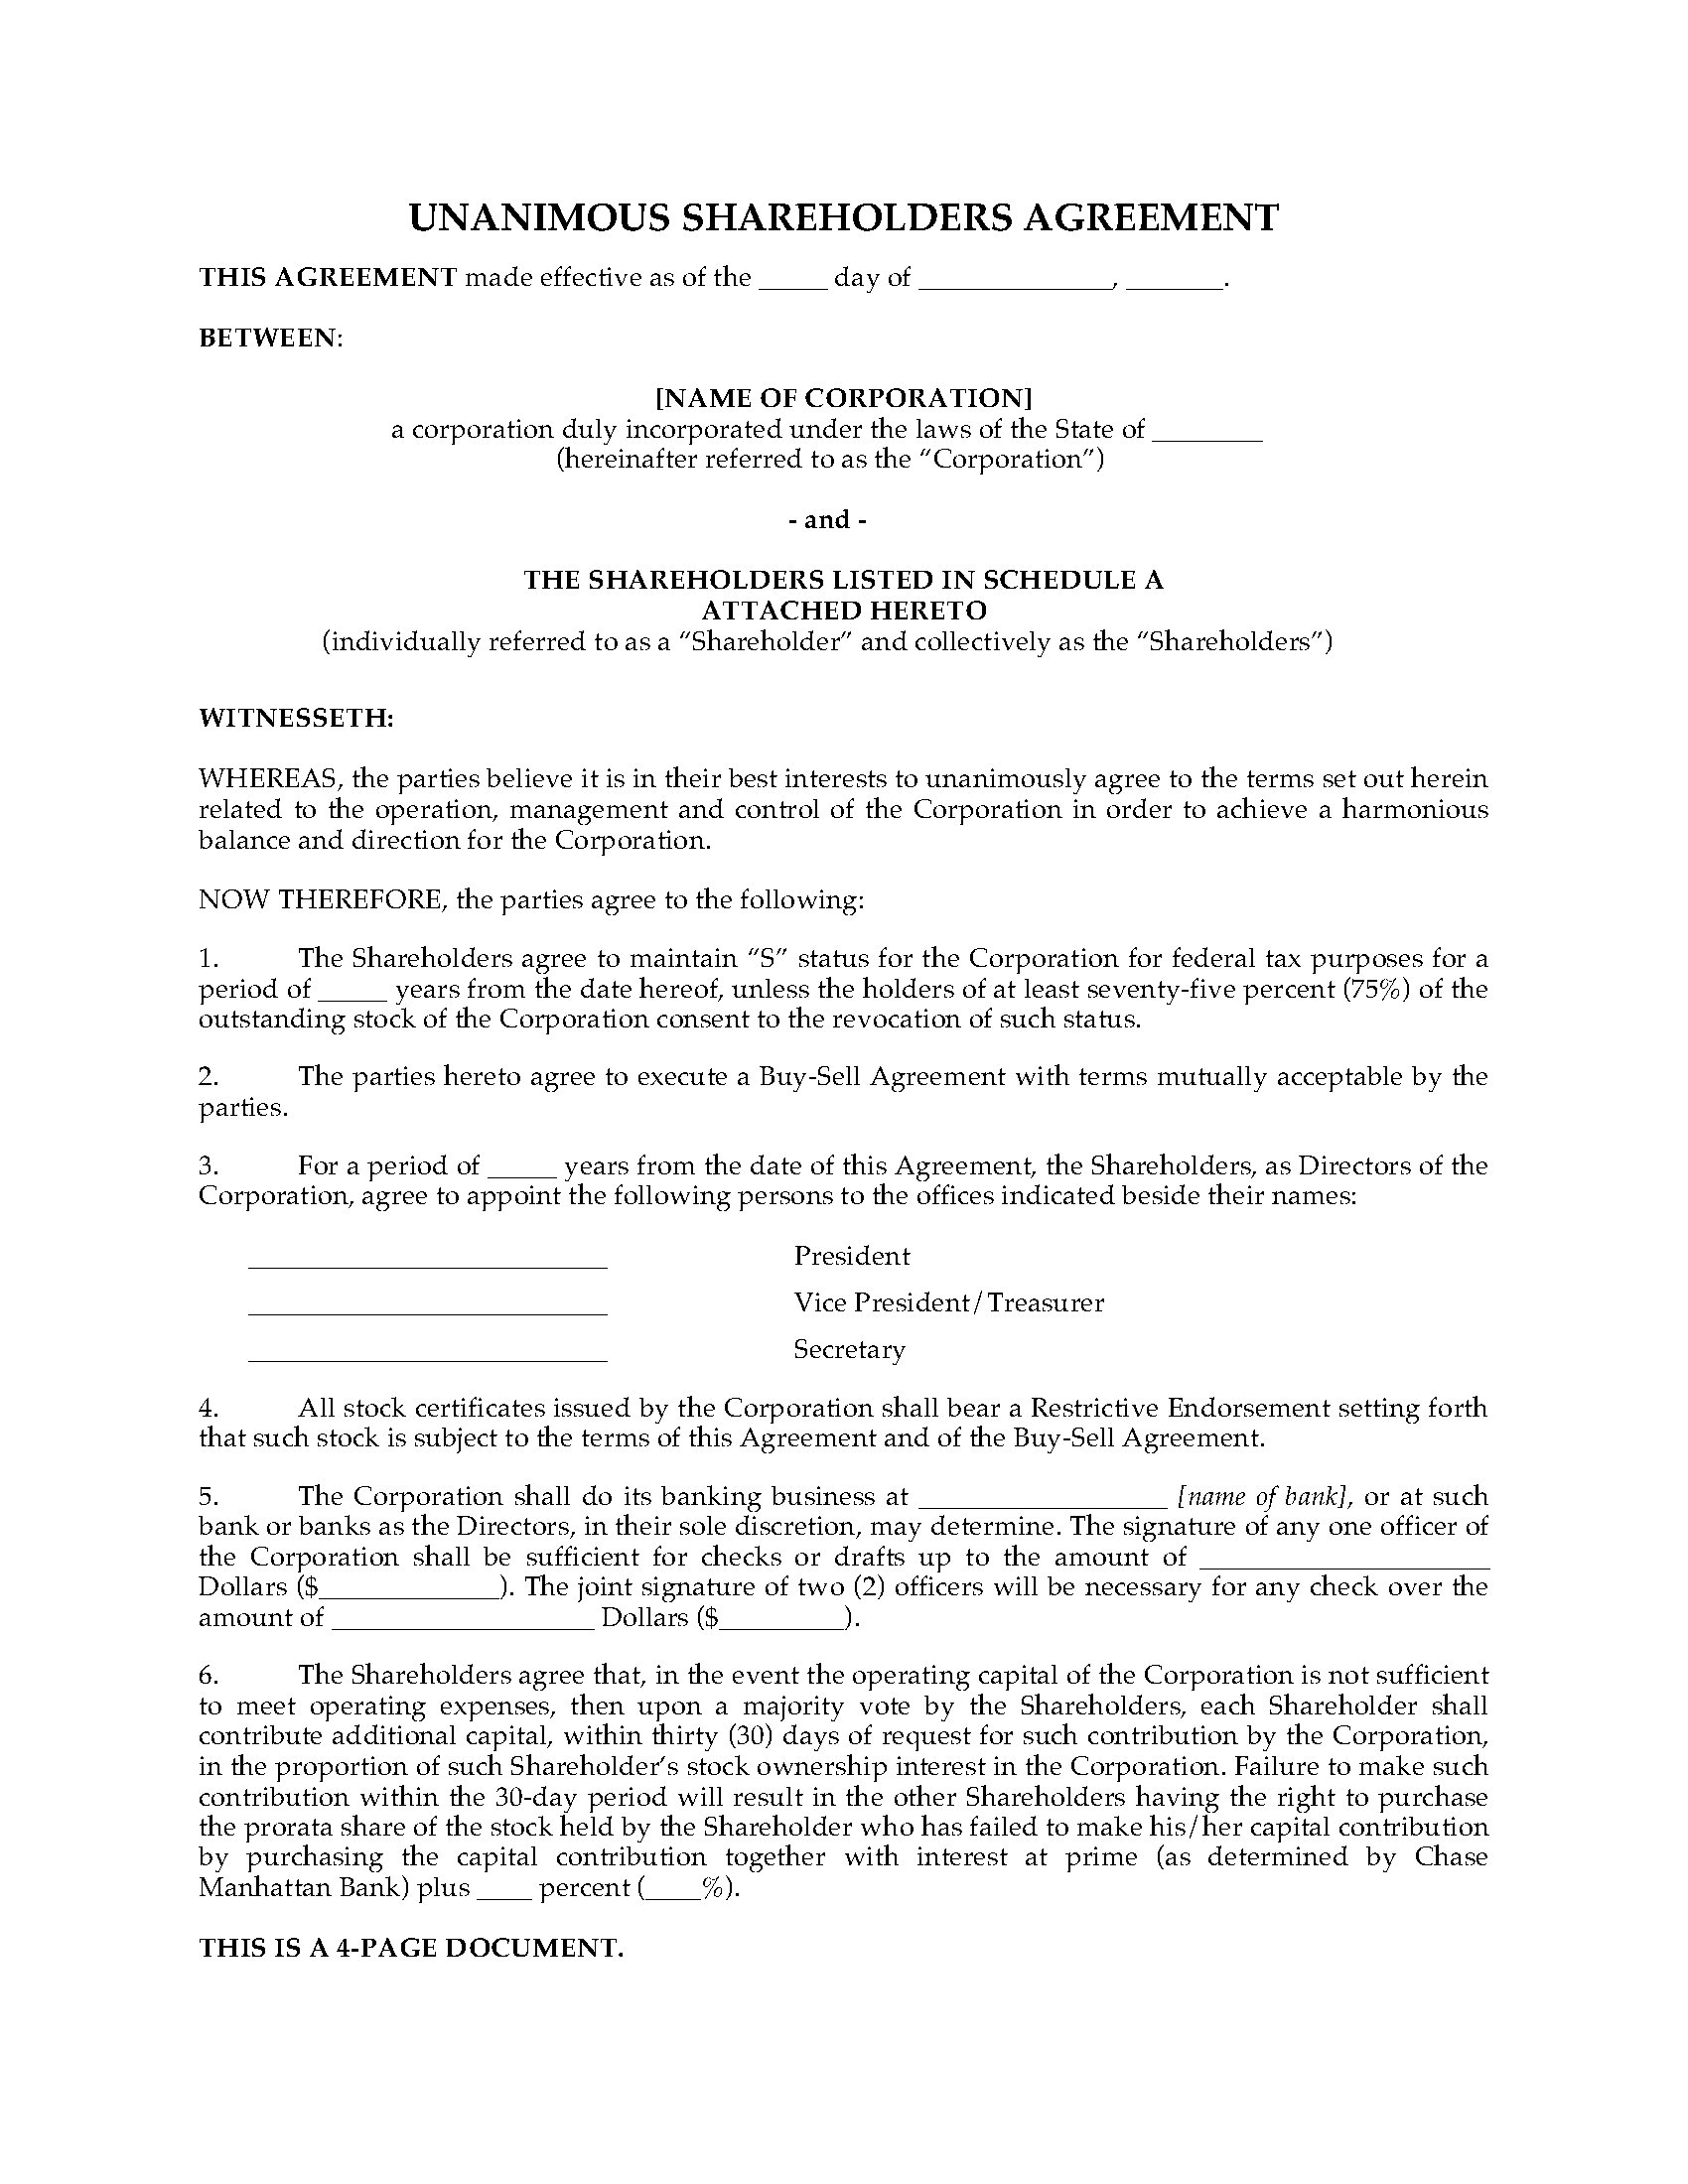 USA Shareholders Agreement for S Corporation  Legal Forms and In corporate buy sell agreement template